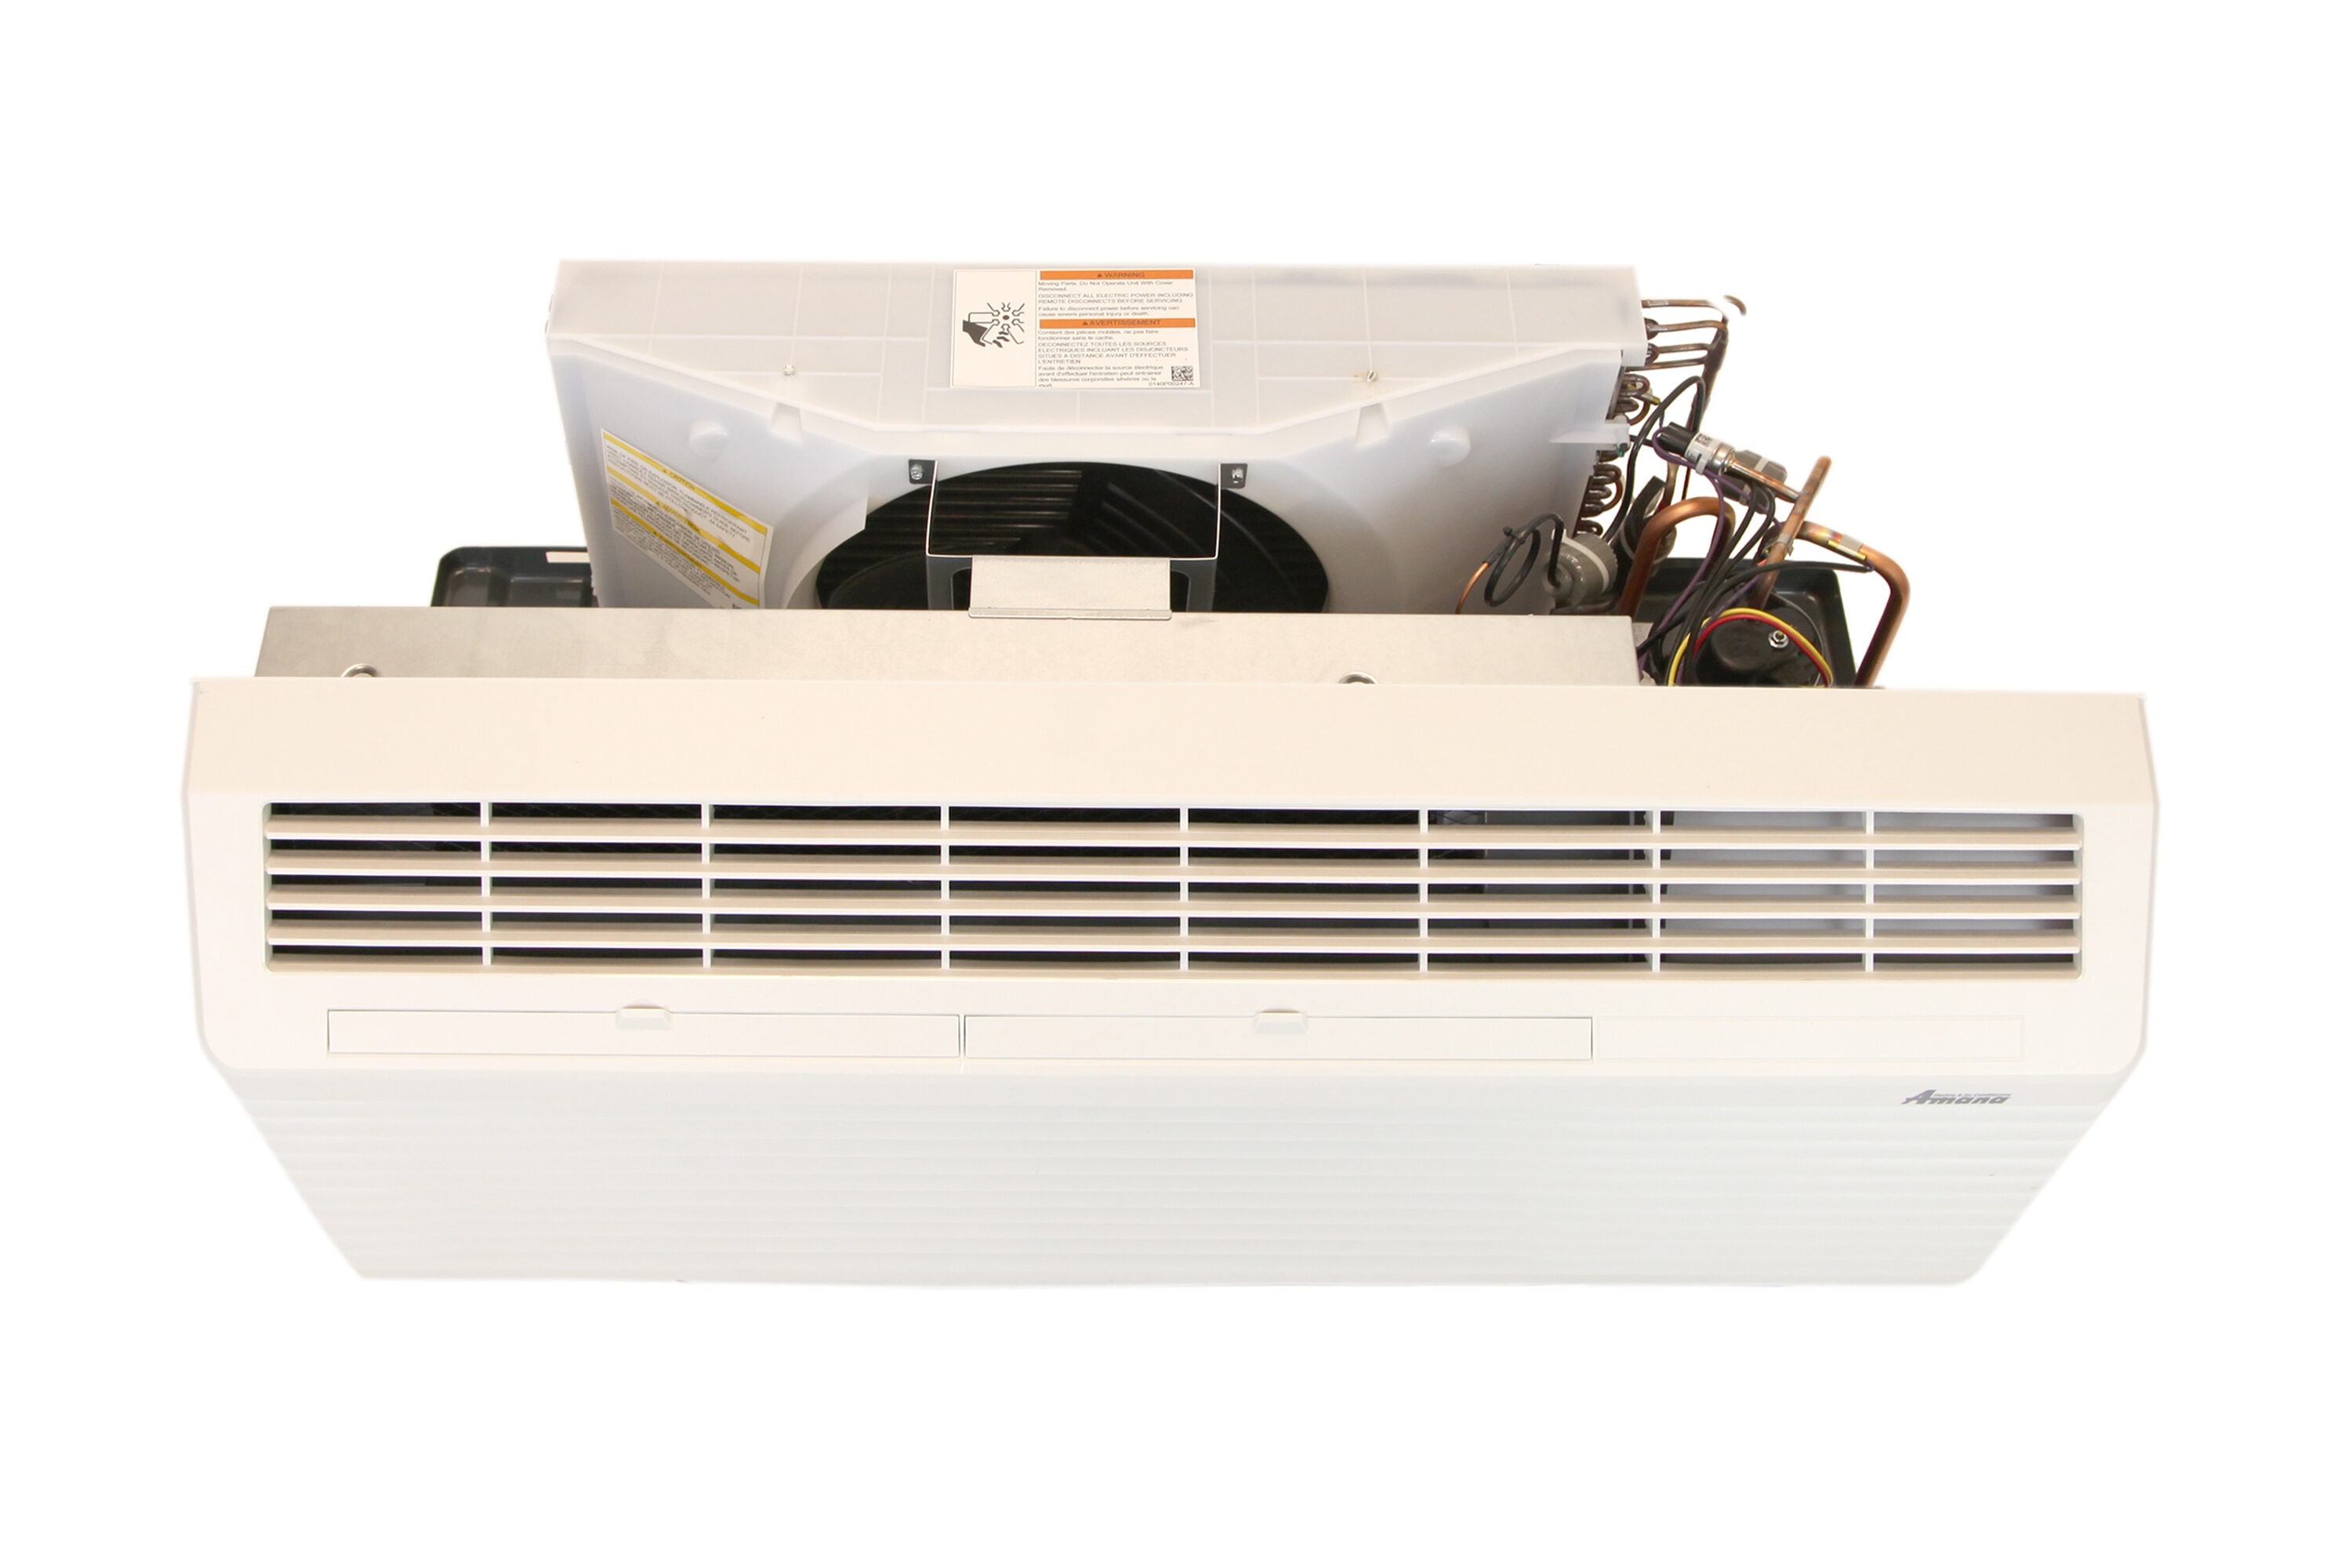 White-Rodgers - 45 to 99°F, 2 Heat, 1 Cool, Economy Digital Heat Pump  Thermostat (Hardwired with Battery Back-Up) - 05284906 - MSC Industrial  Supply